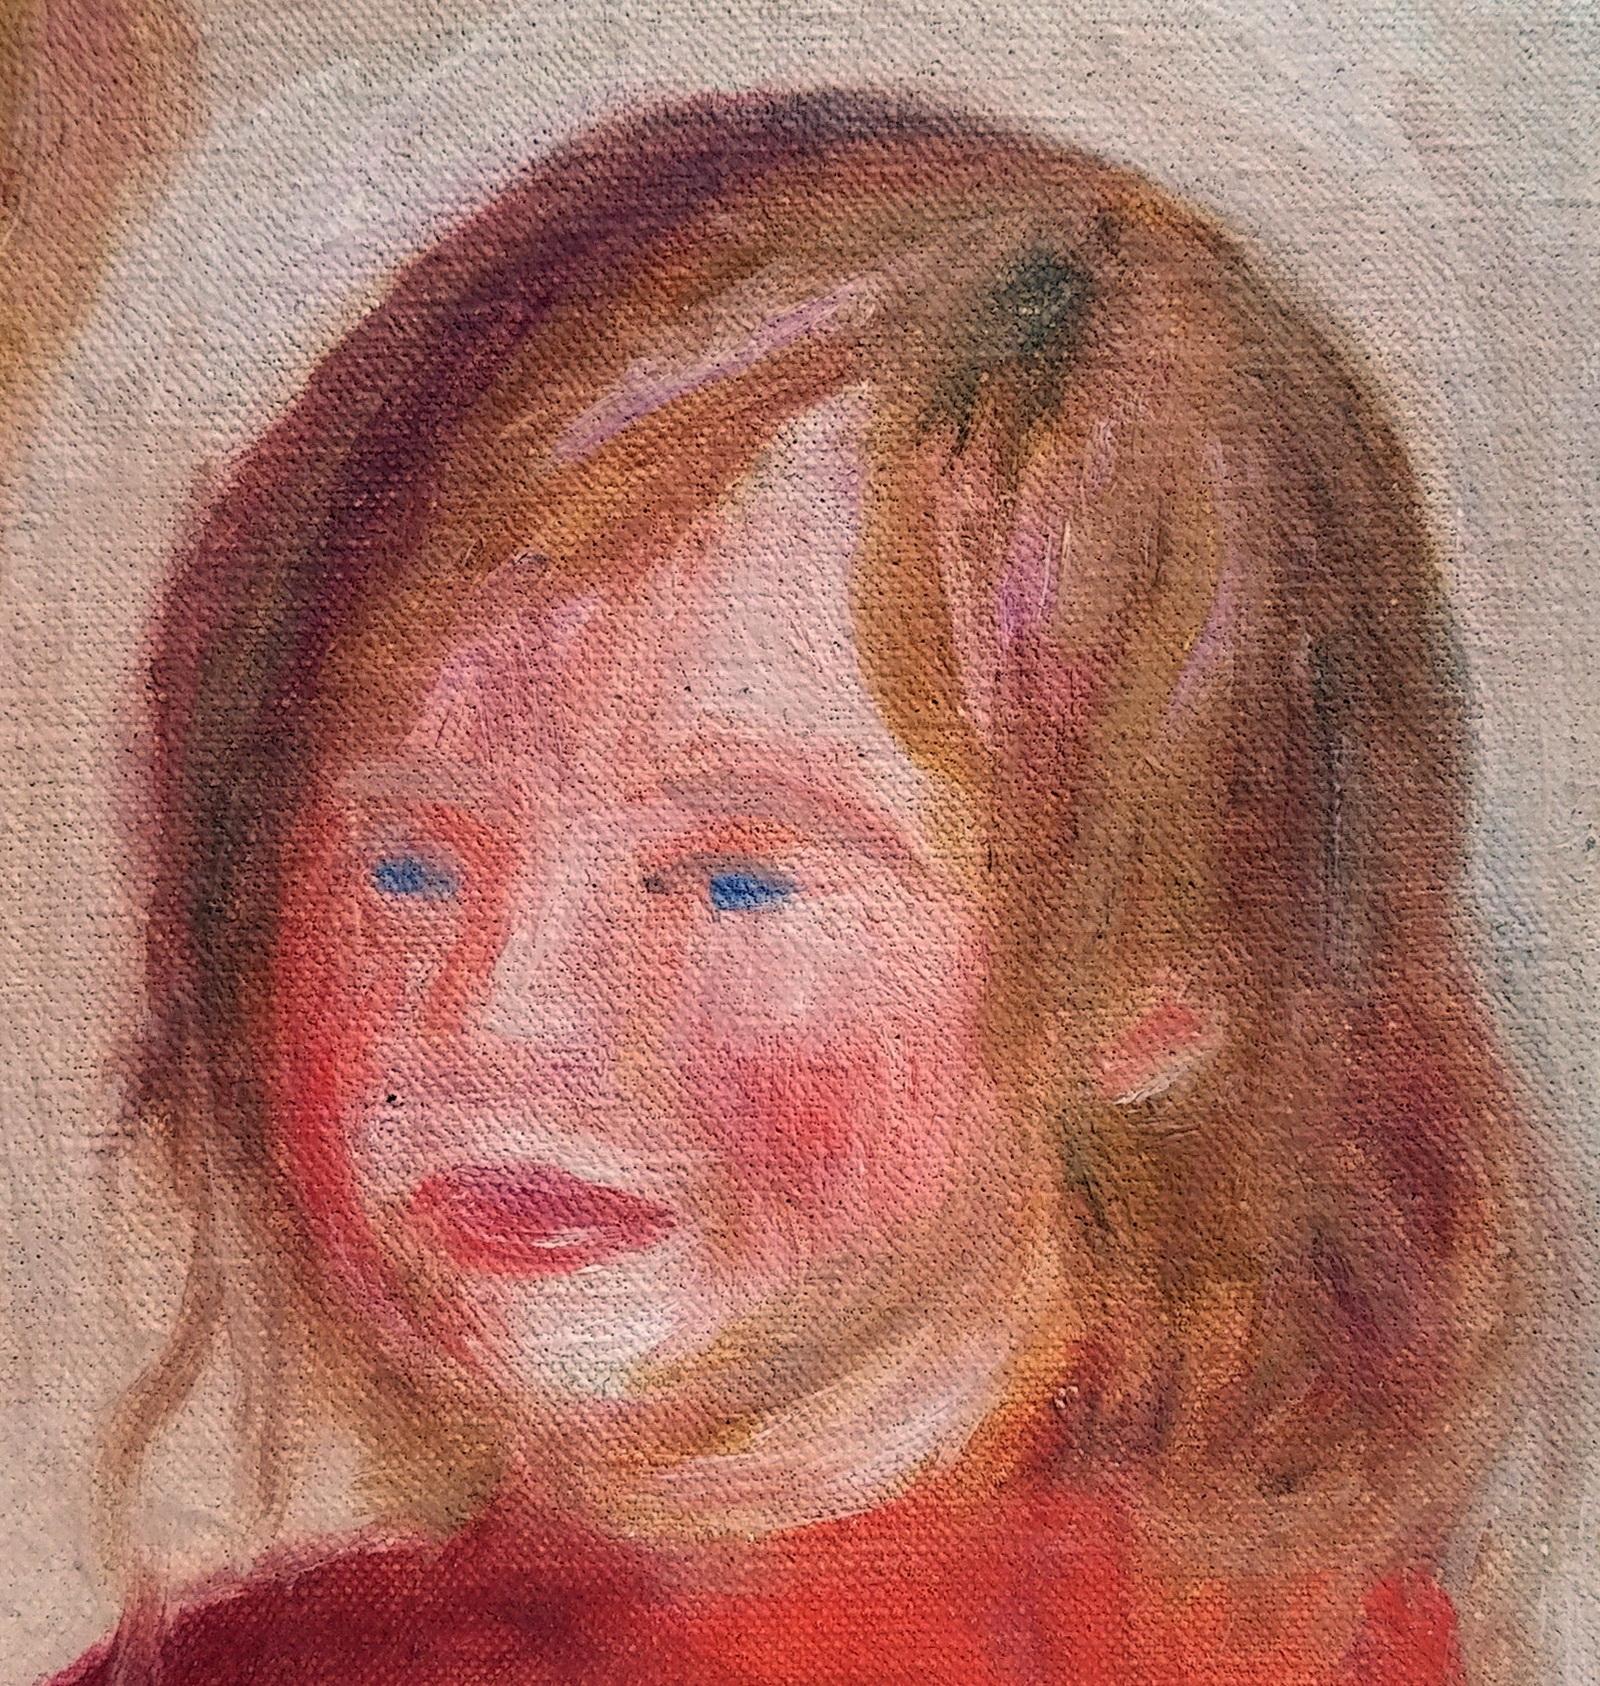 Pierre-Auguste Renoir, Boy bust in red – fragment
c. 1905
Oil on canvas
The artwork is accompanied by its certificate of authenticity by the Wildenstein Plattner Institute

Provenance:

– Ambroise Vollard, Paris, consigned by the artist (as of